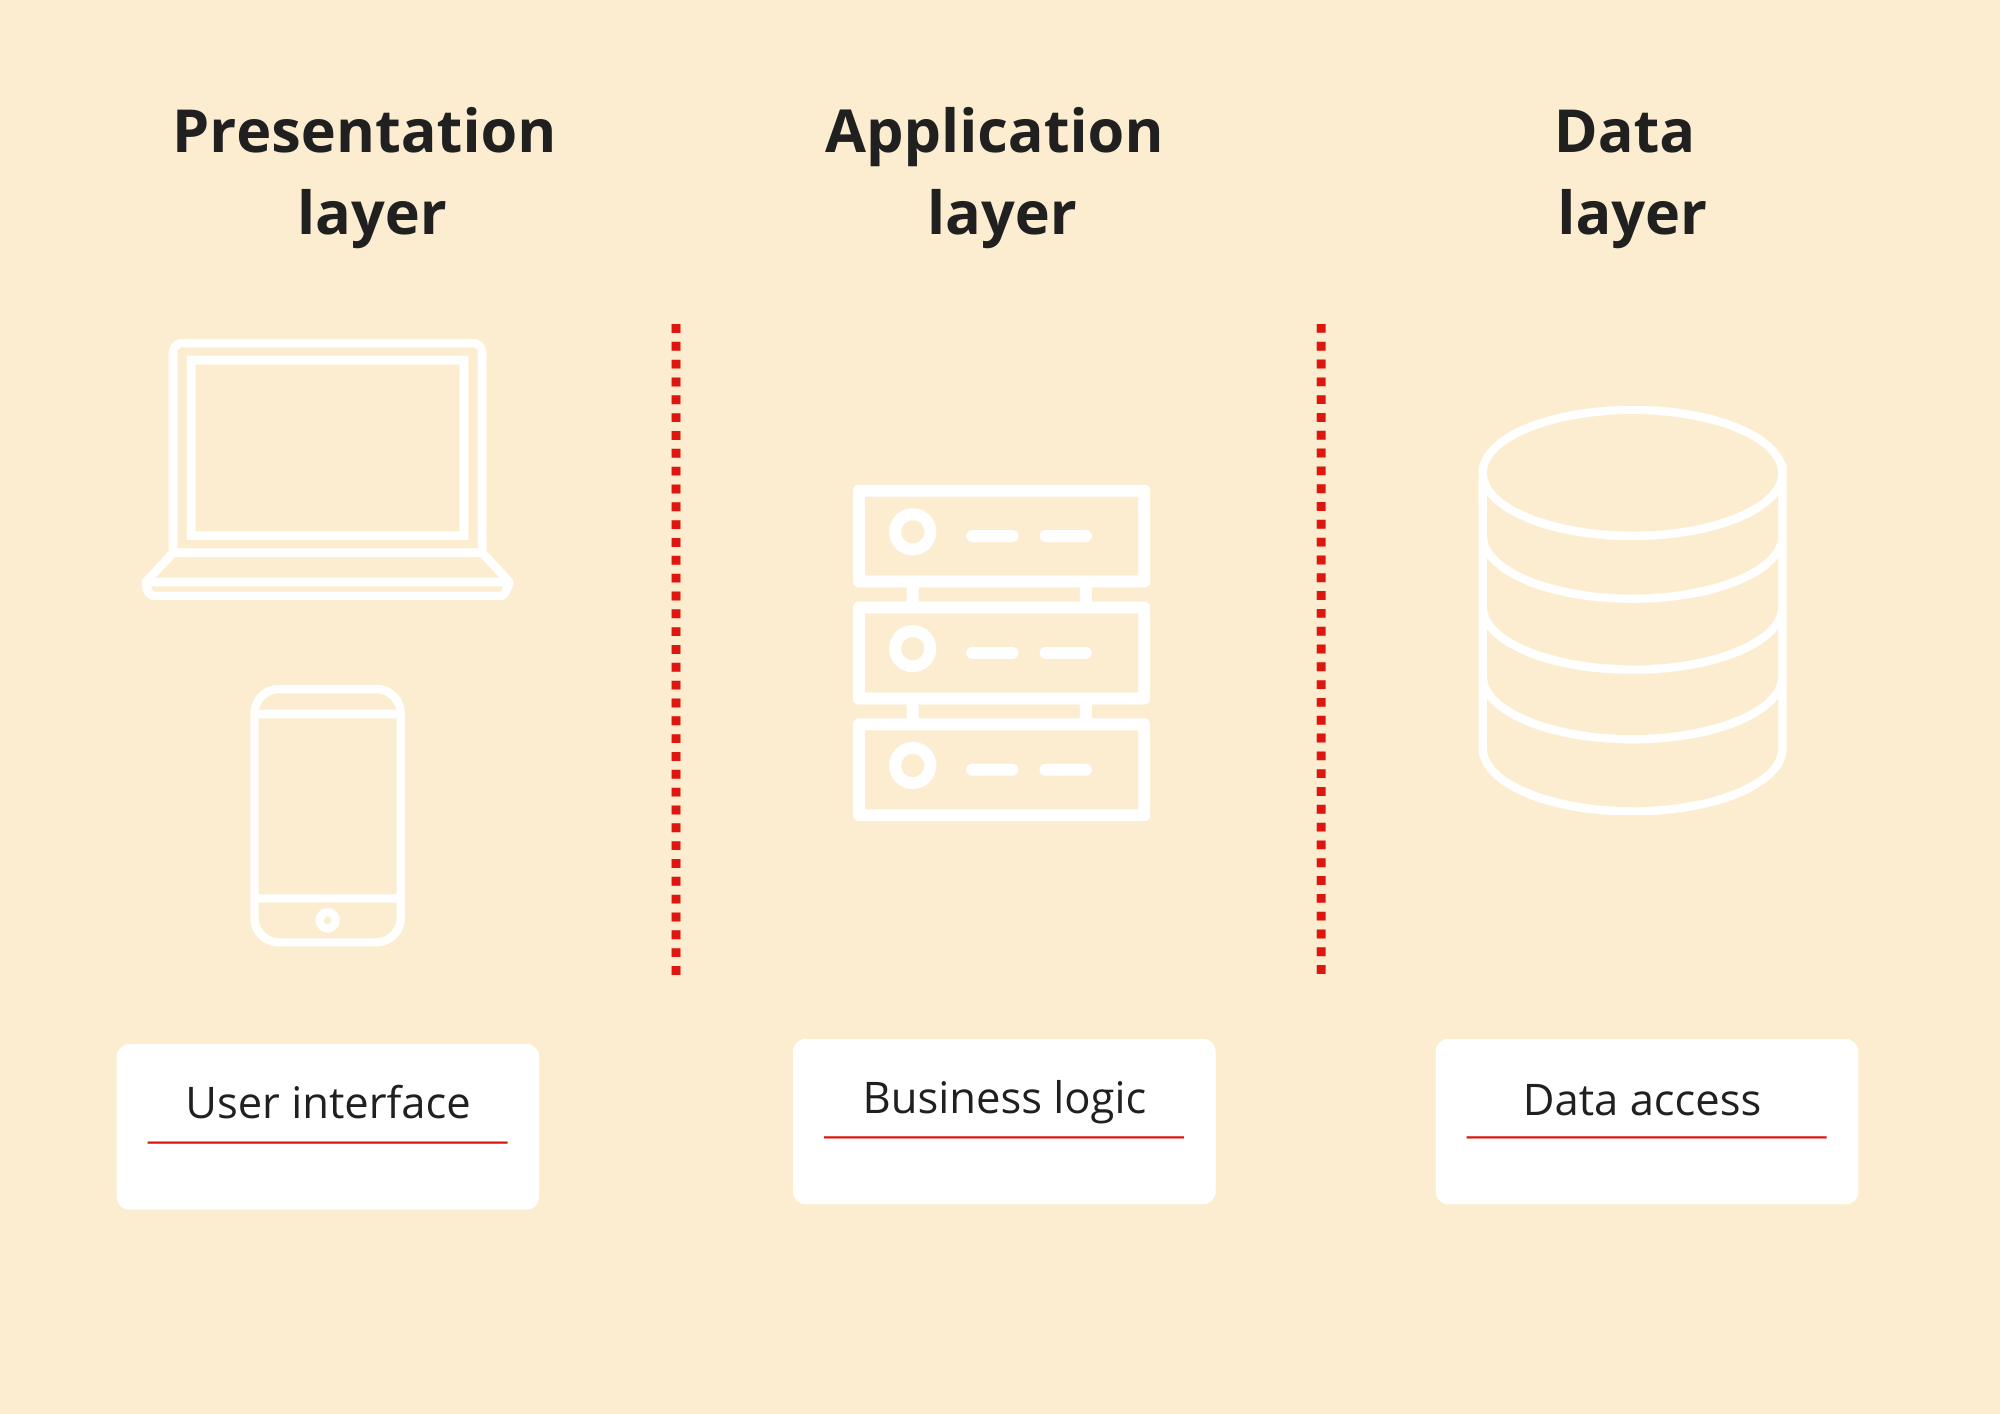 Web application architecture: Definition, components, models, and types